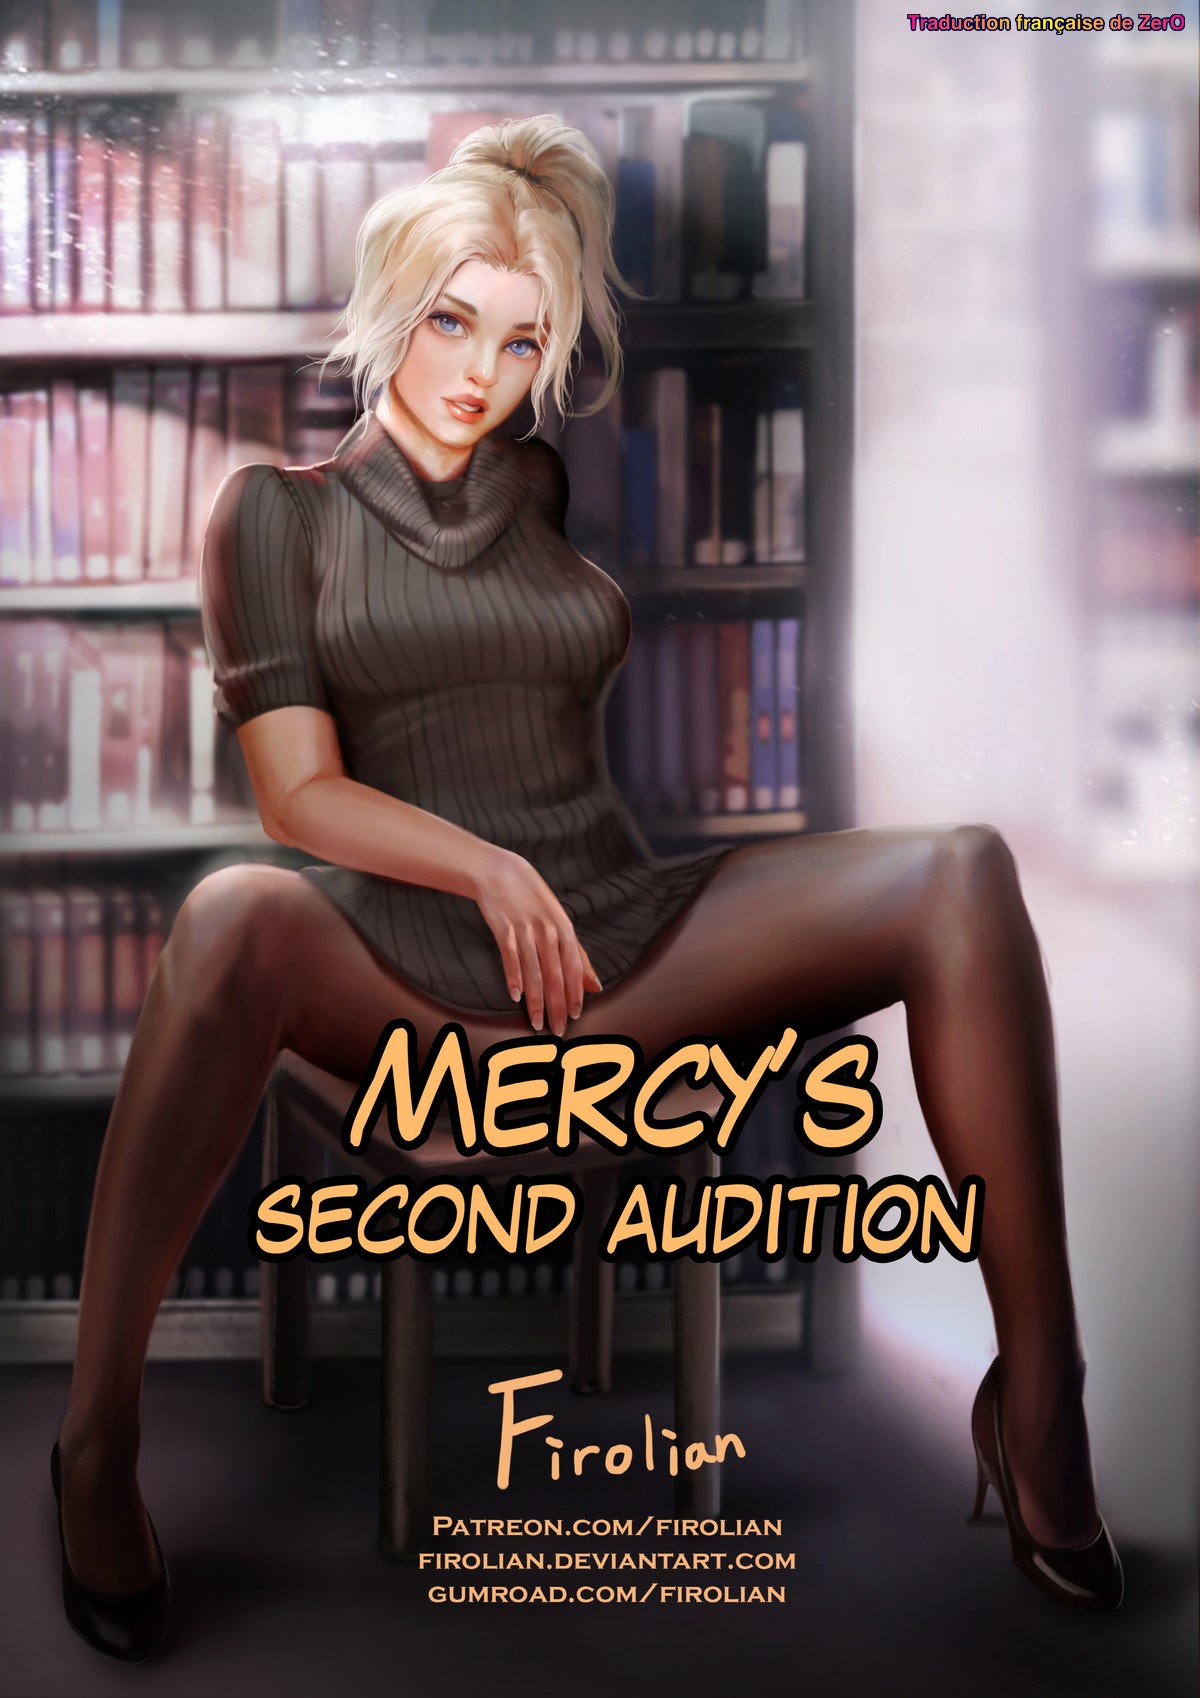 [Firolian] Mercy's second audition [French] Porn Comic